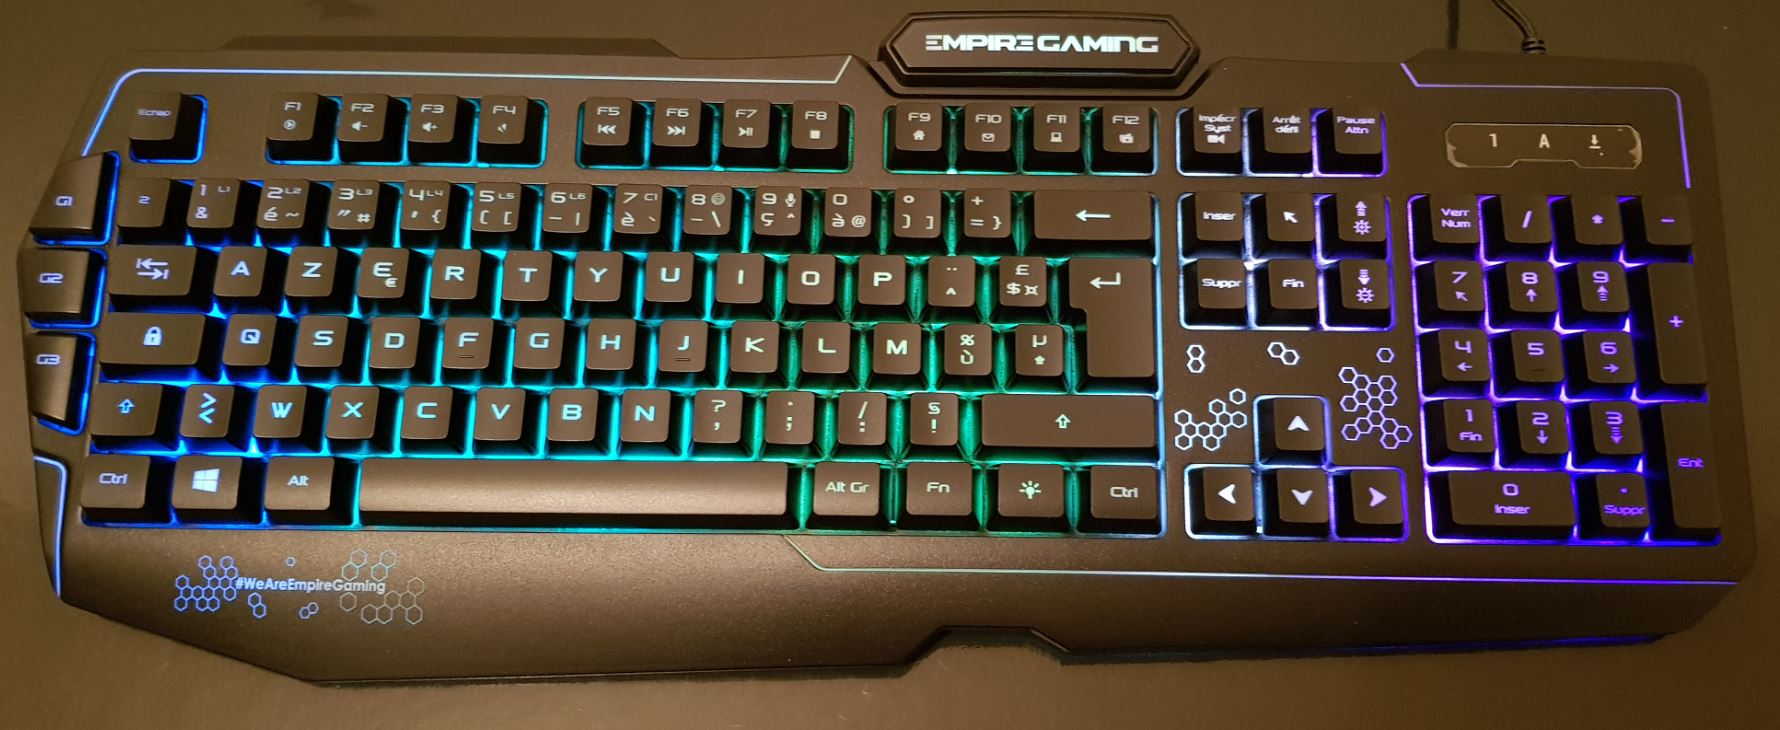 Test] Clavier Empire Gaming K900